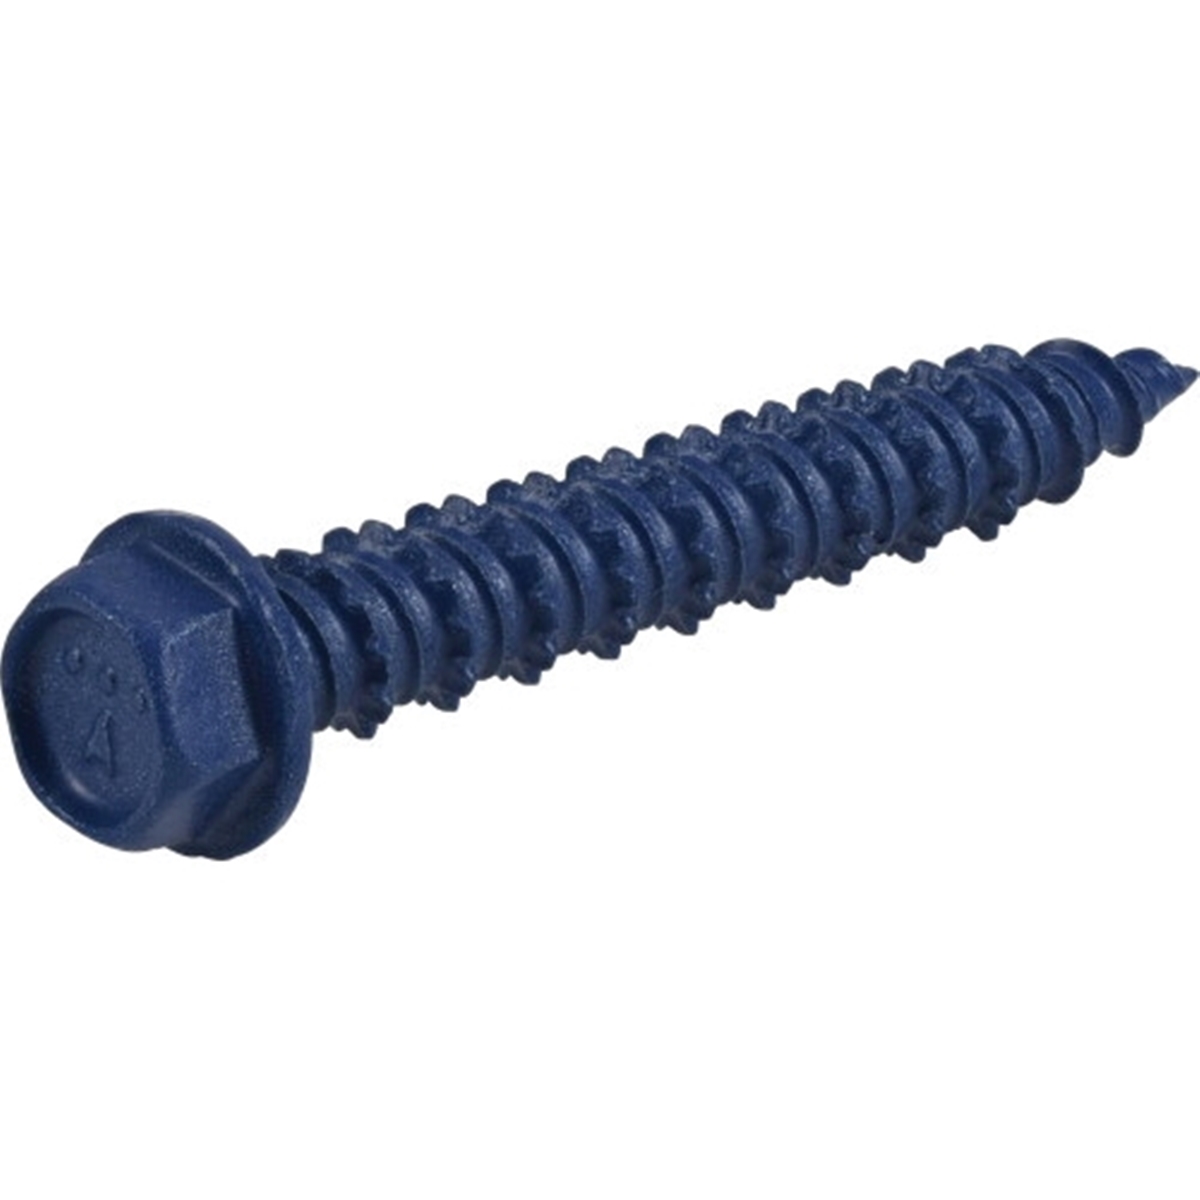 376509 Concrete Screw Anchor, 1/4 in Dia, 1-3/4 in L, Carbon Steel, Epoxy-Coated, 100/PK